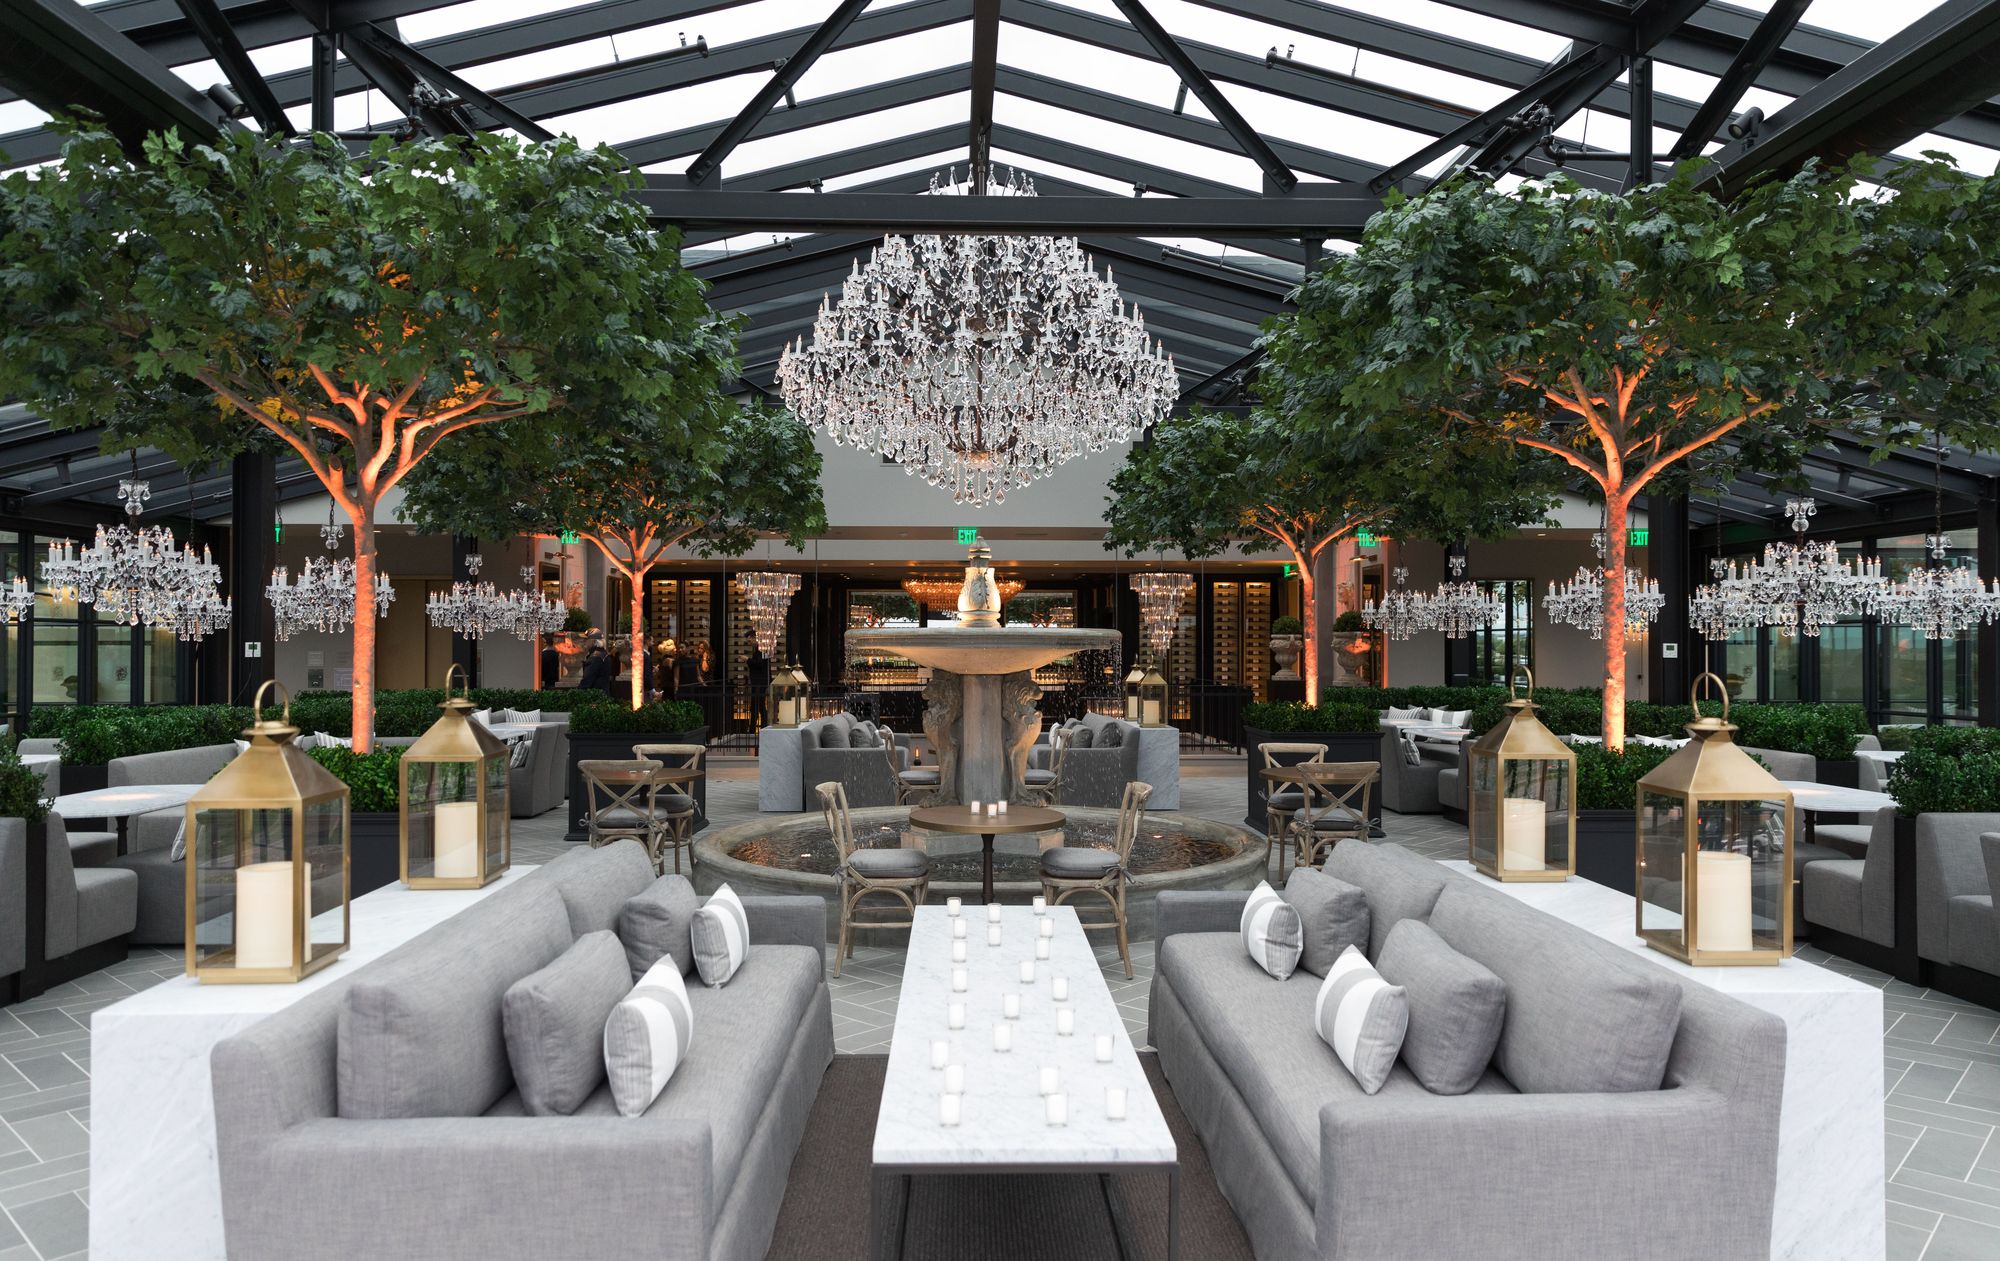 The rooftop restaurant inside the new Restoration Hardware store across from Southdale in Edina.